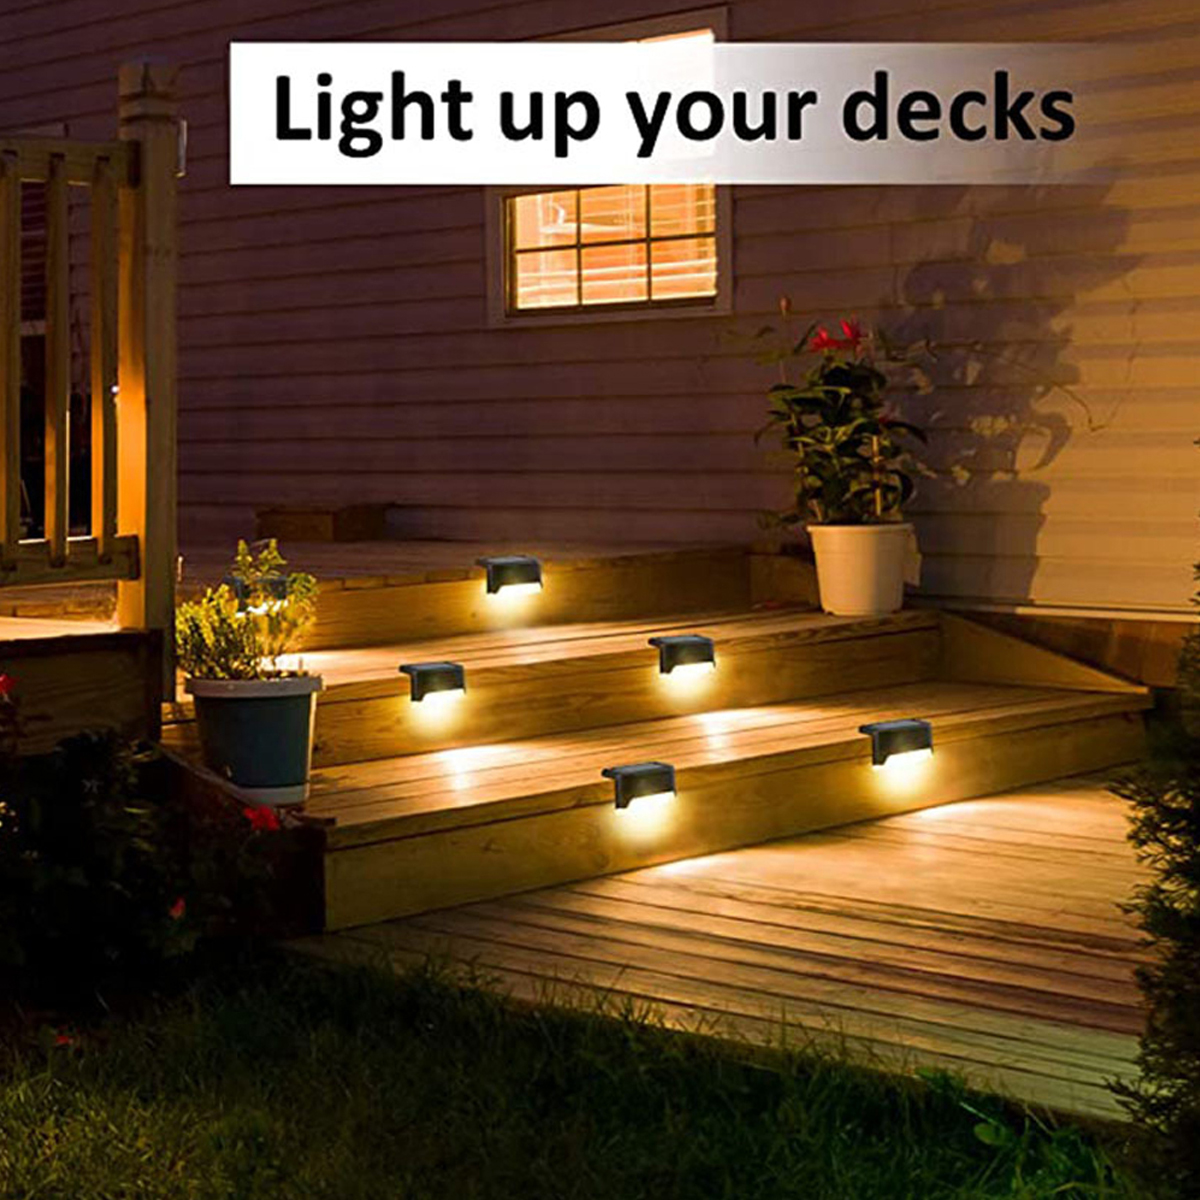 4PCS-LED-Solar-Path-Stair-Lamp-Outdoor-Waterproof-Wall-Lawn-Light-for-Garden-Home-1754581-10